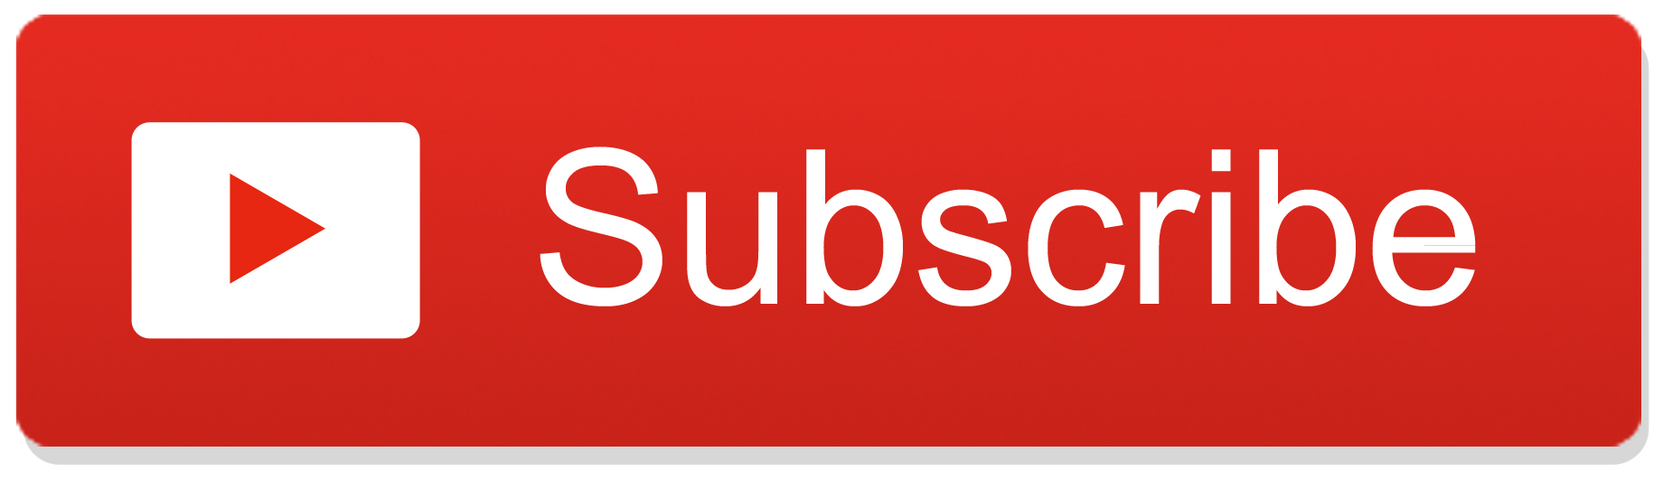 Youtube Subscribe Button 2014 By Just Browsiing On Deviantart